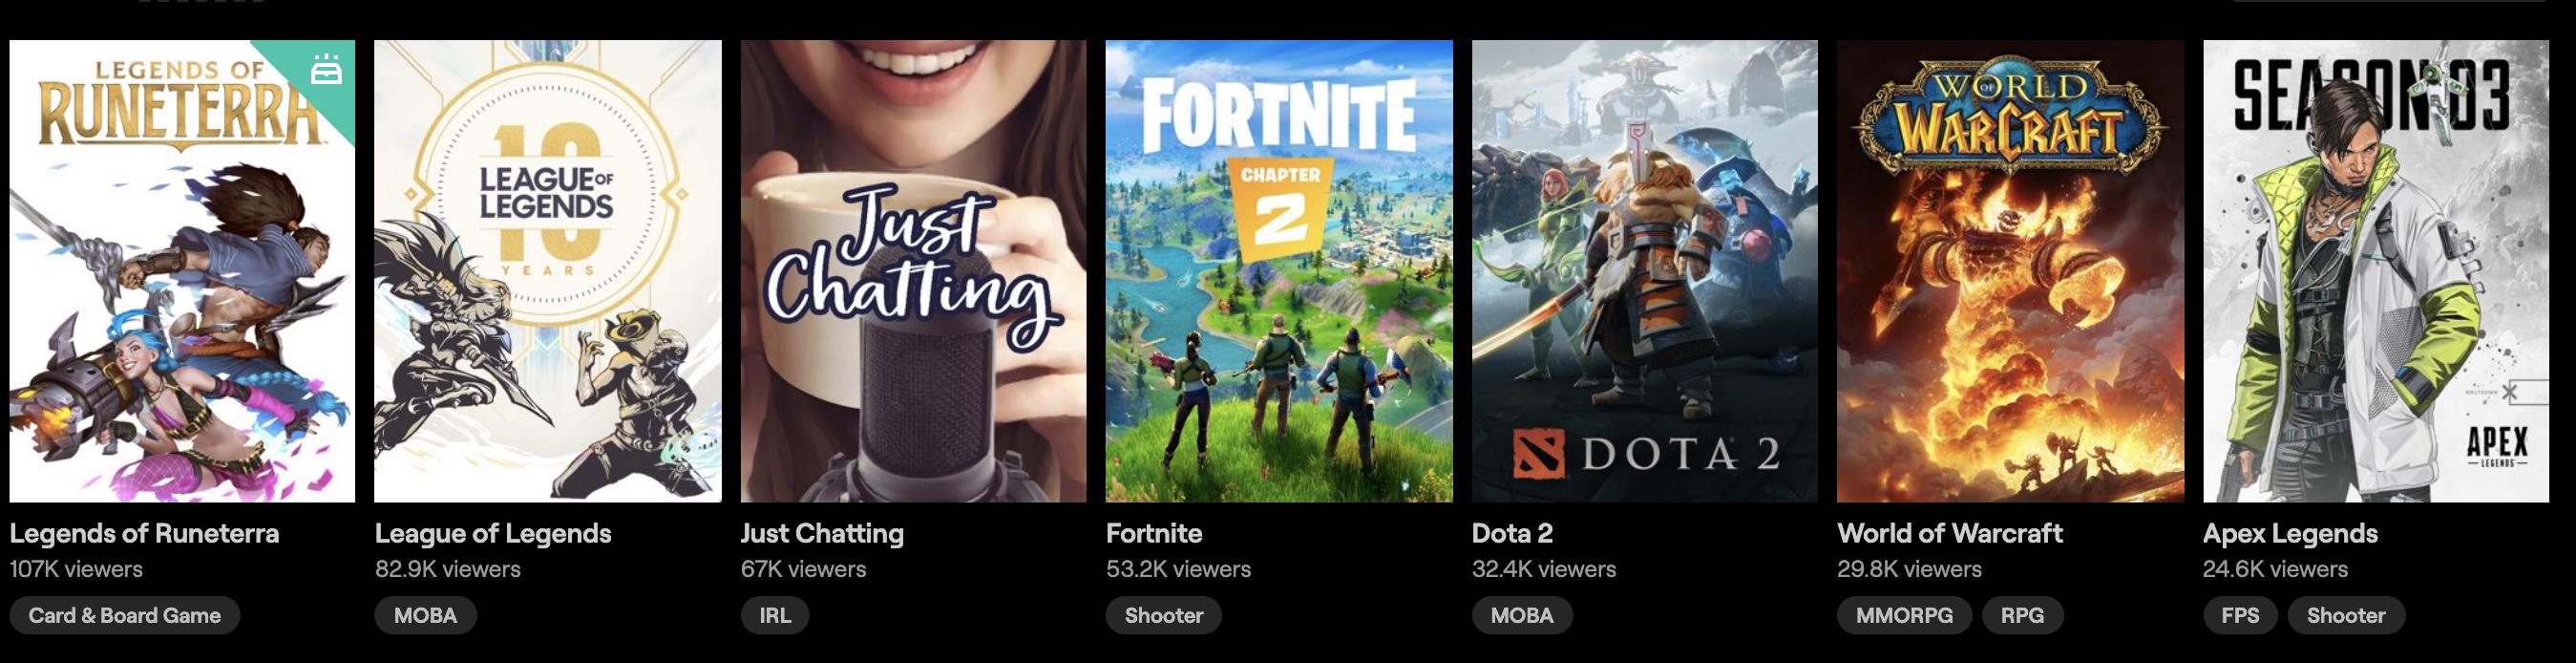 LoL card game Legends of Runeterra already dominating Twitch viewership ...